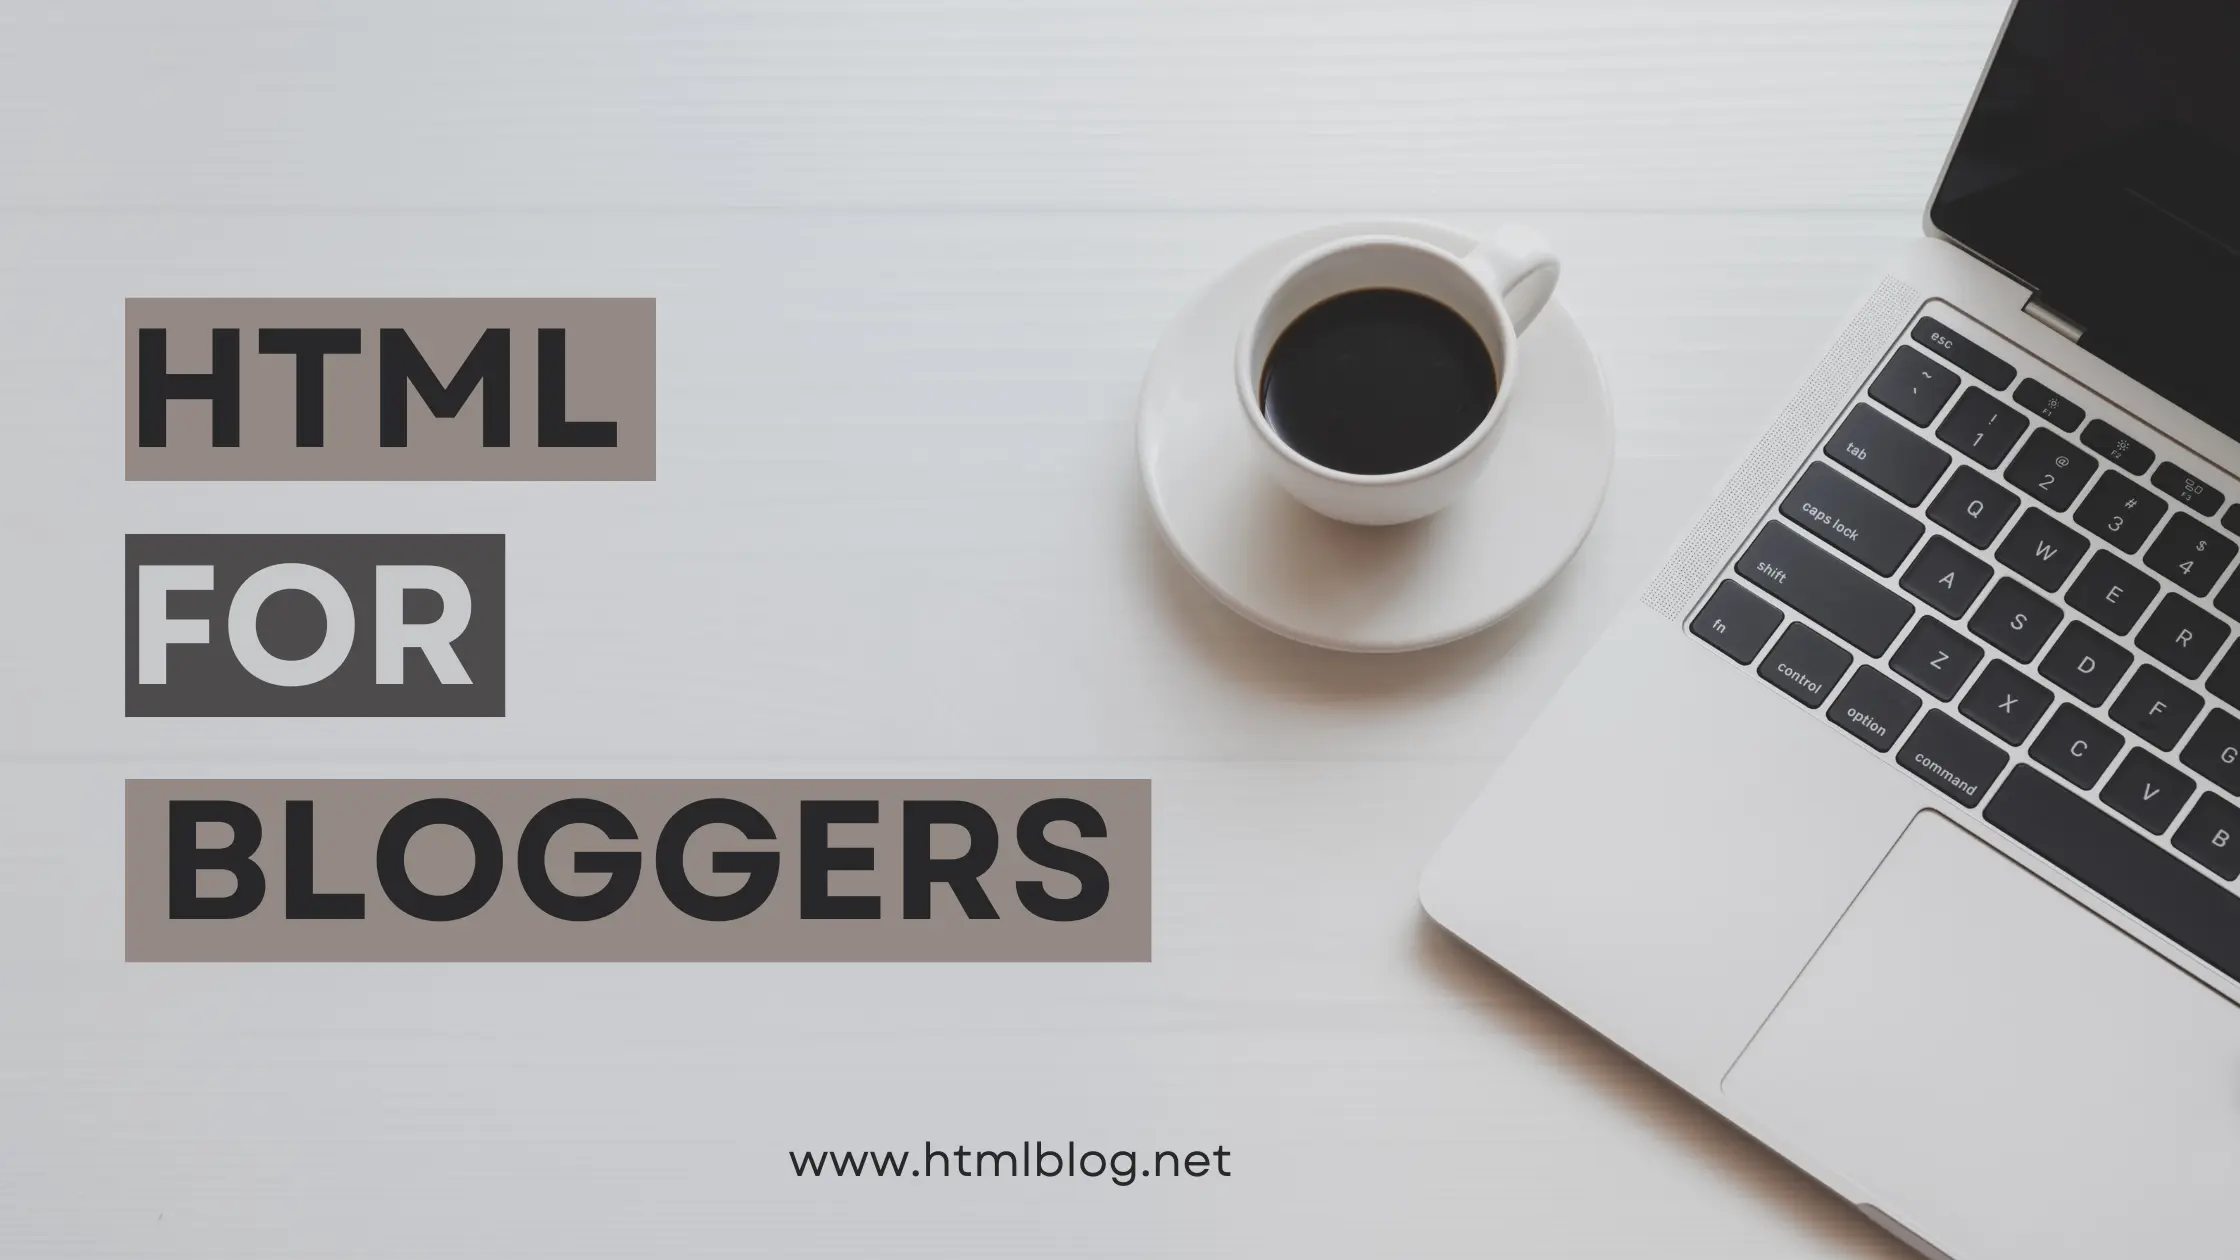 HTML for bloggers